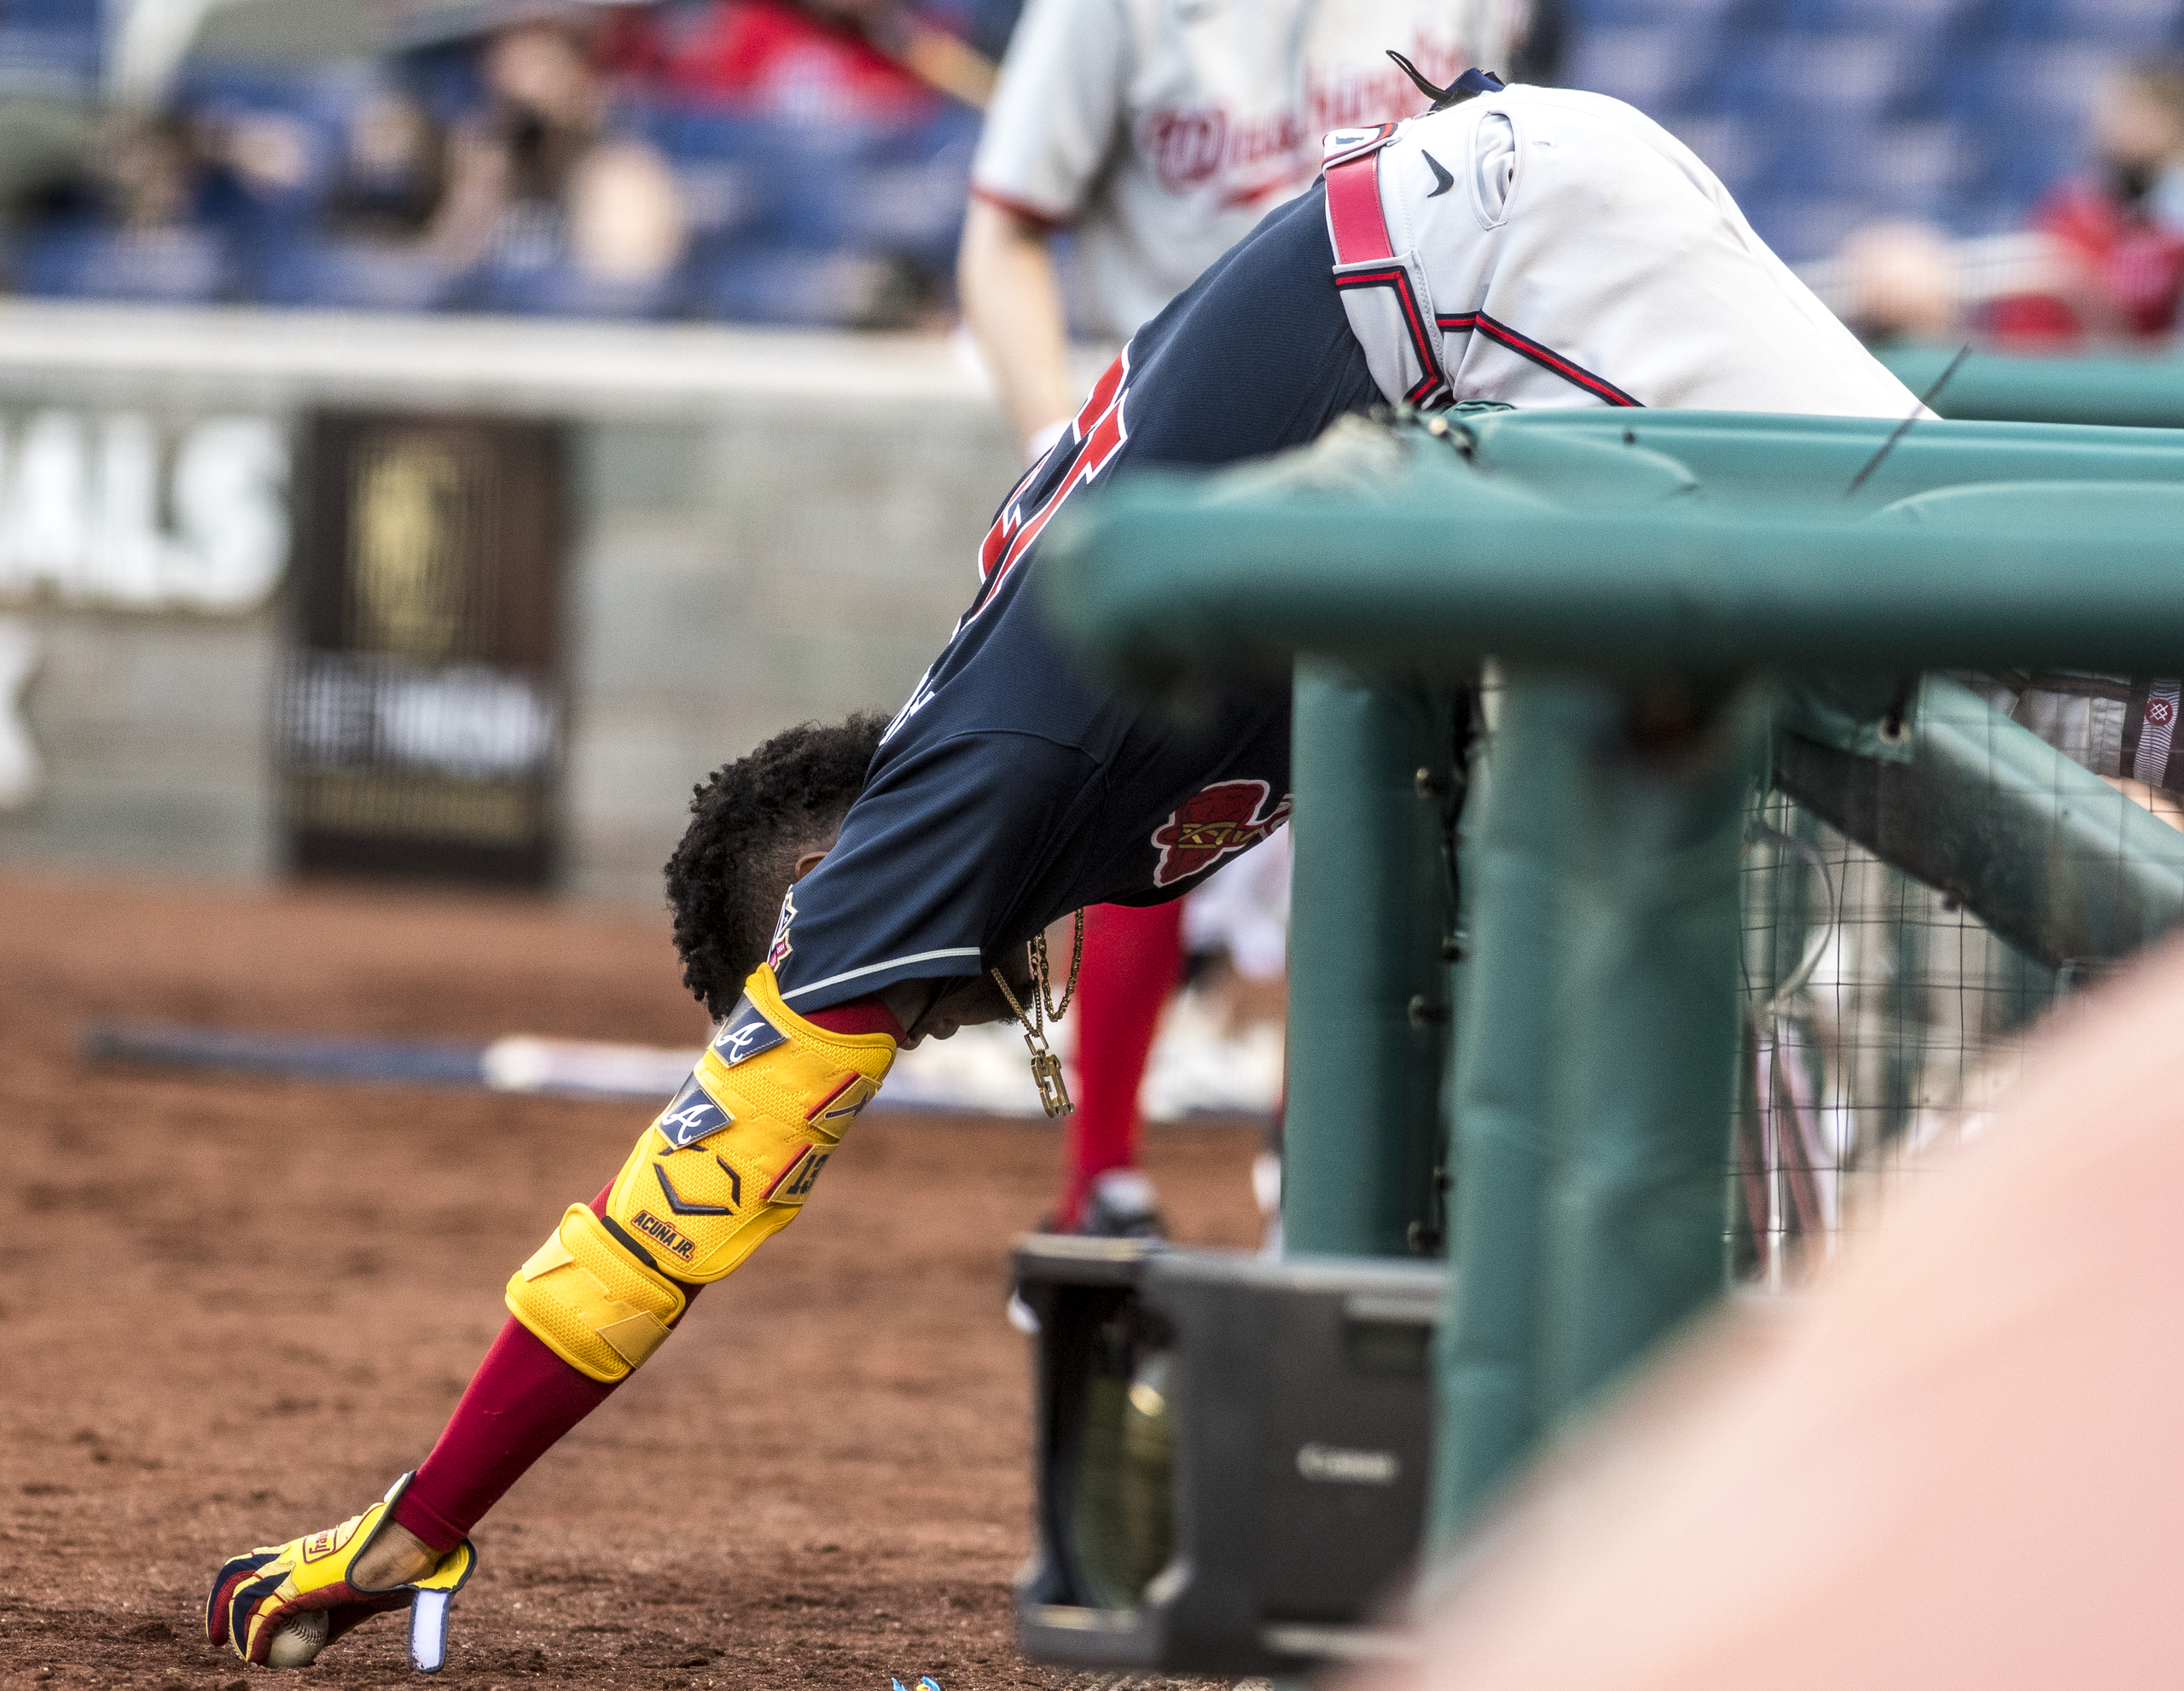 File:Ronald Acuna Jr. stretches for ball from Nationals vs. Braves